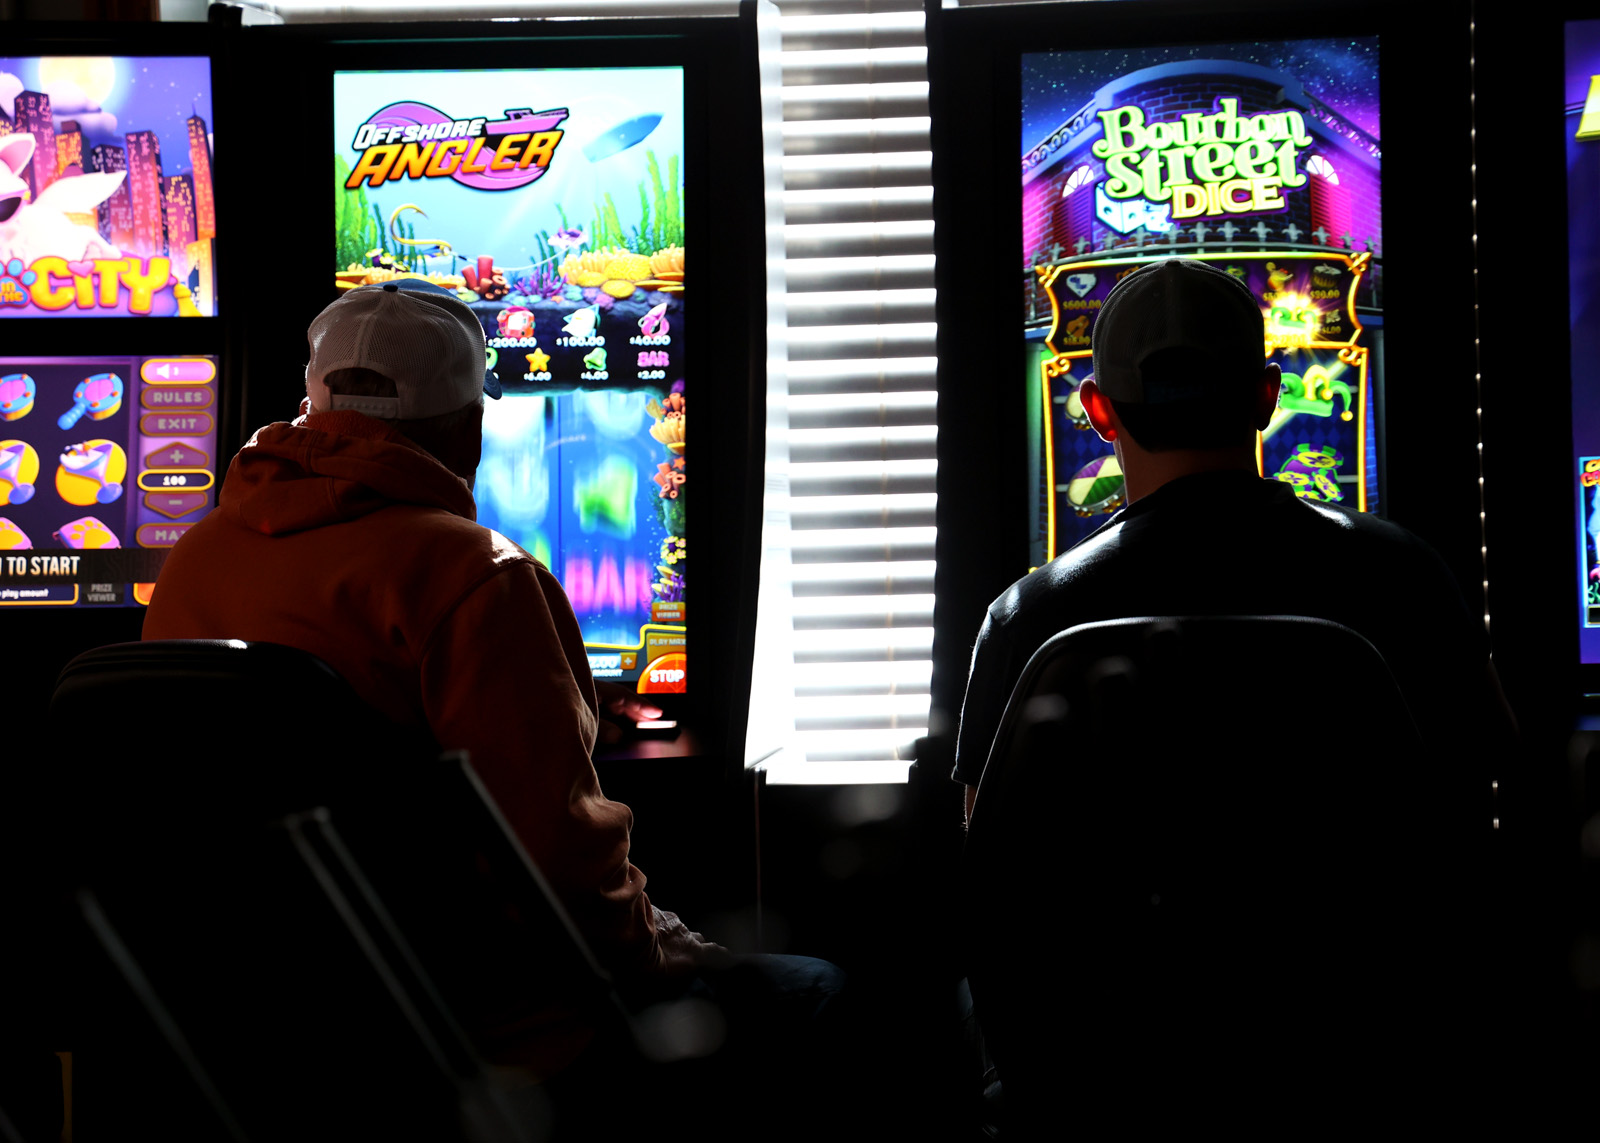 Touch of gray: VLT game rooms pop up in Springfield; City Council weighs ban